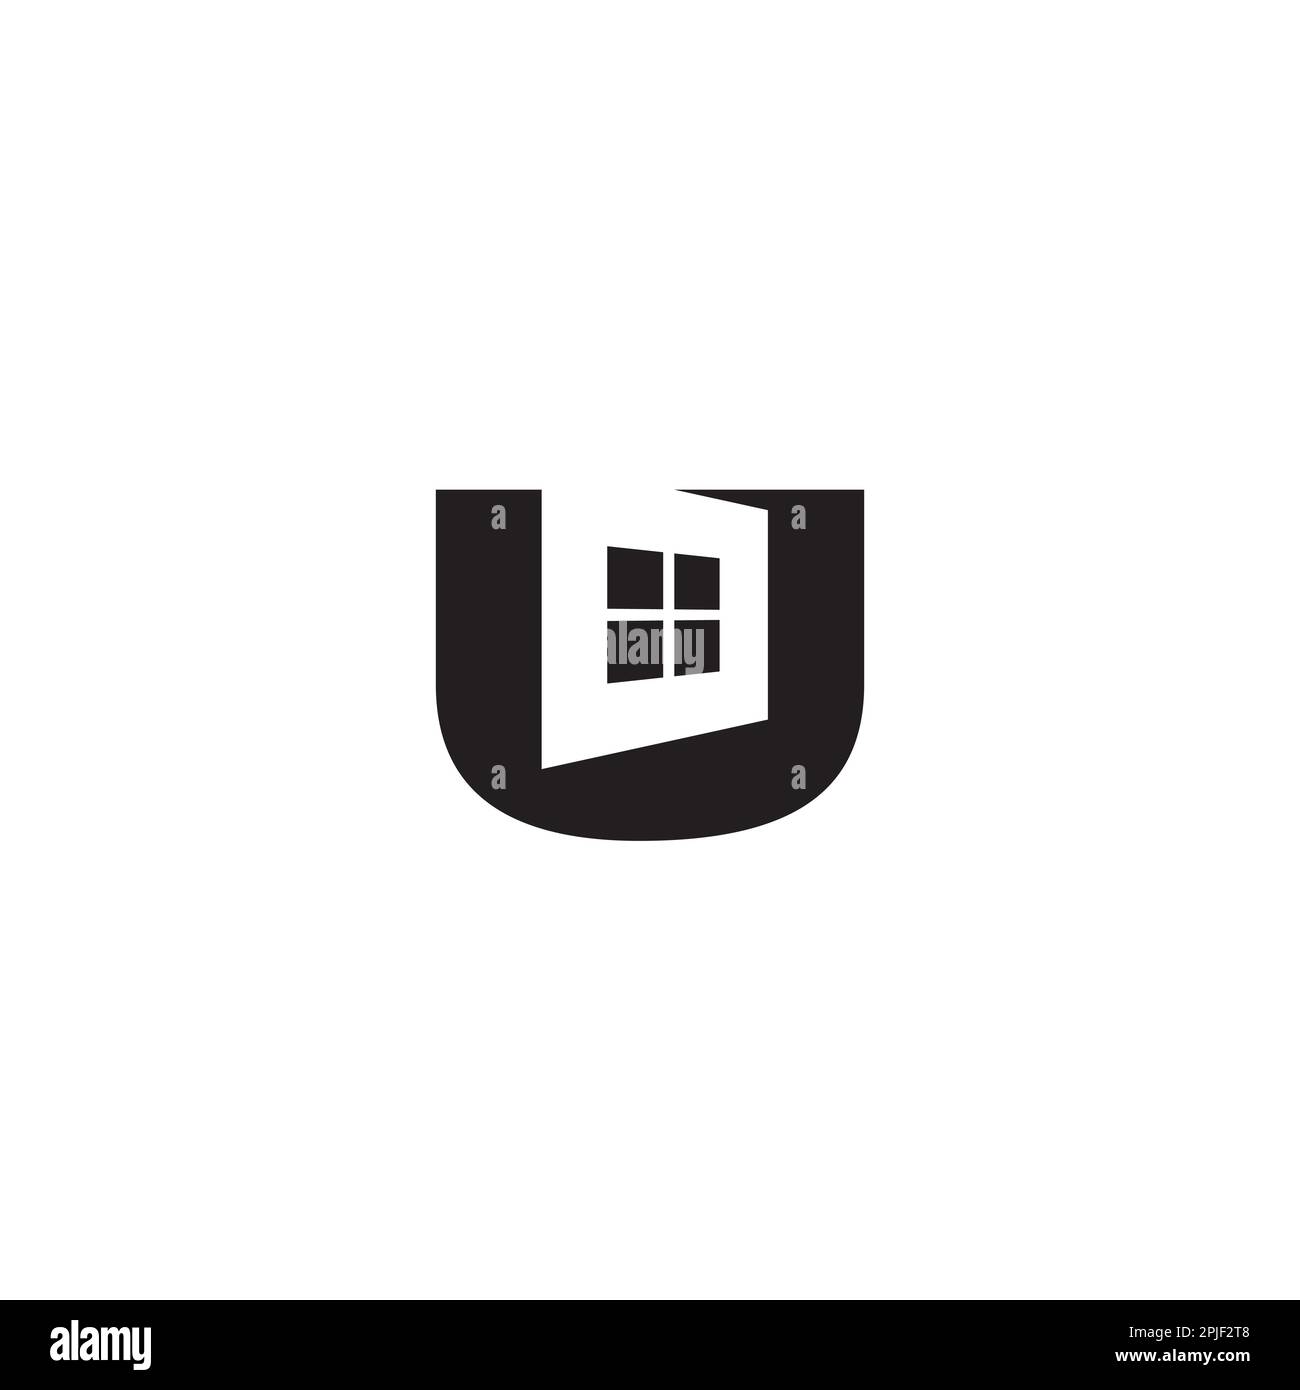 Letter U and Window logo or icon design Stock Vector